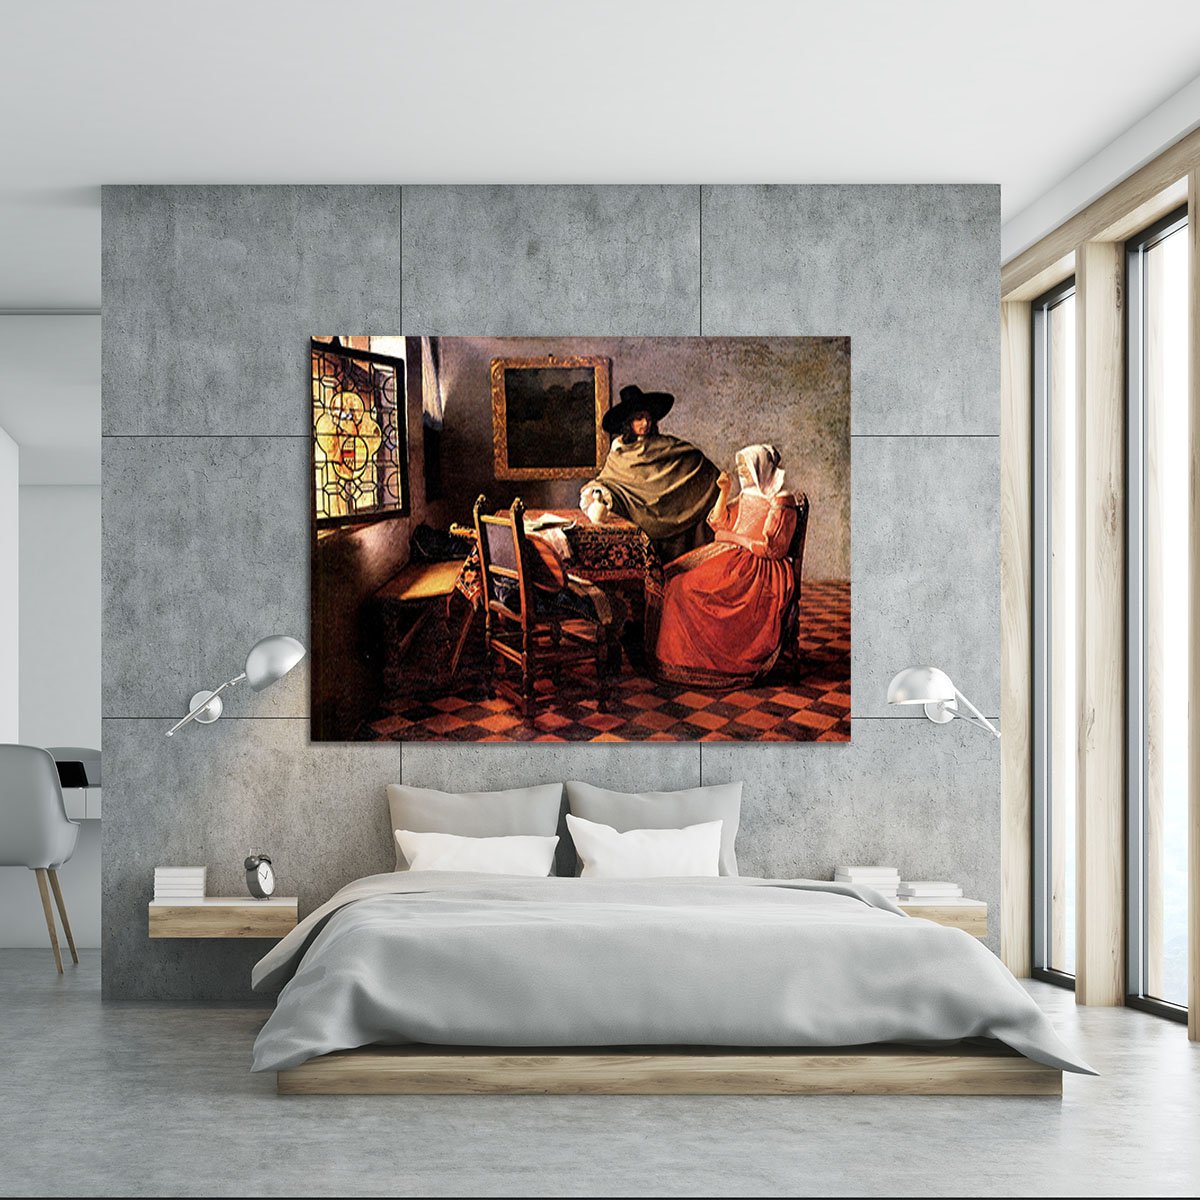 Glass of wine by Vermeer Canvas Print or Poster